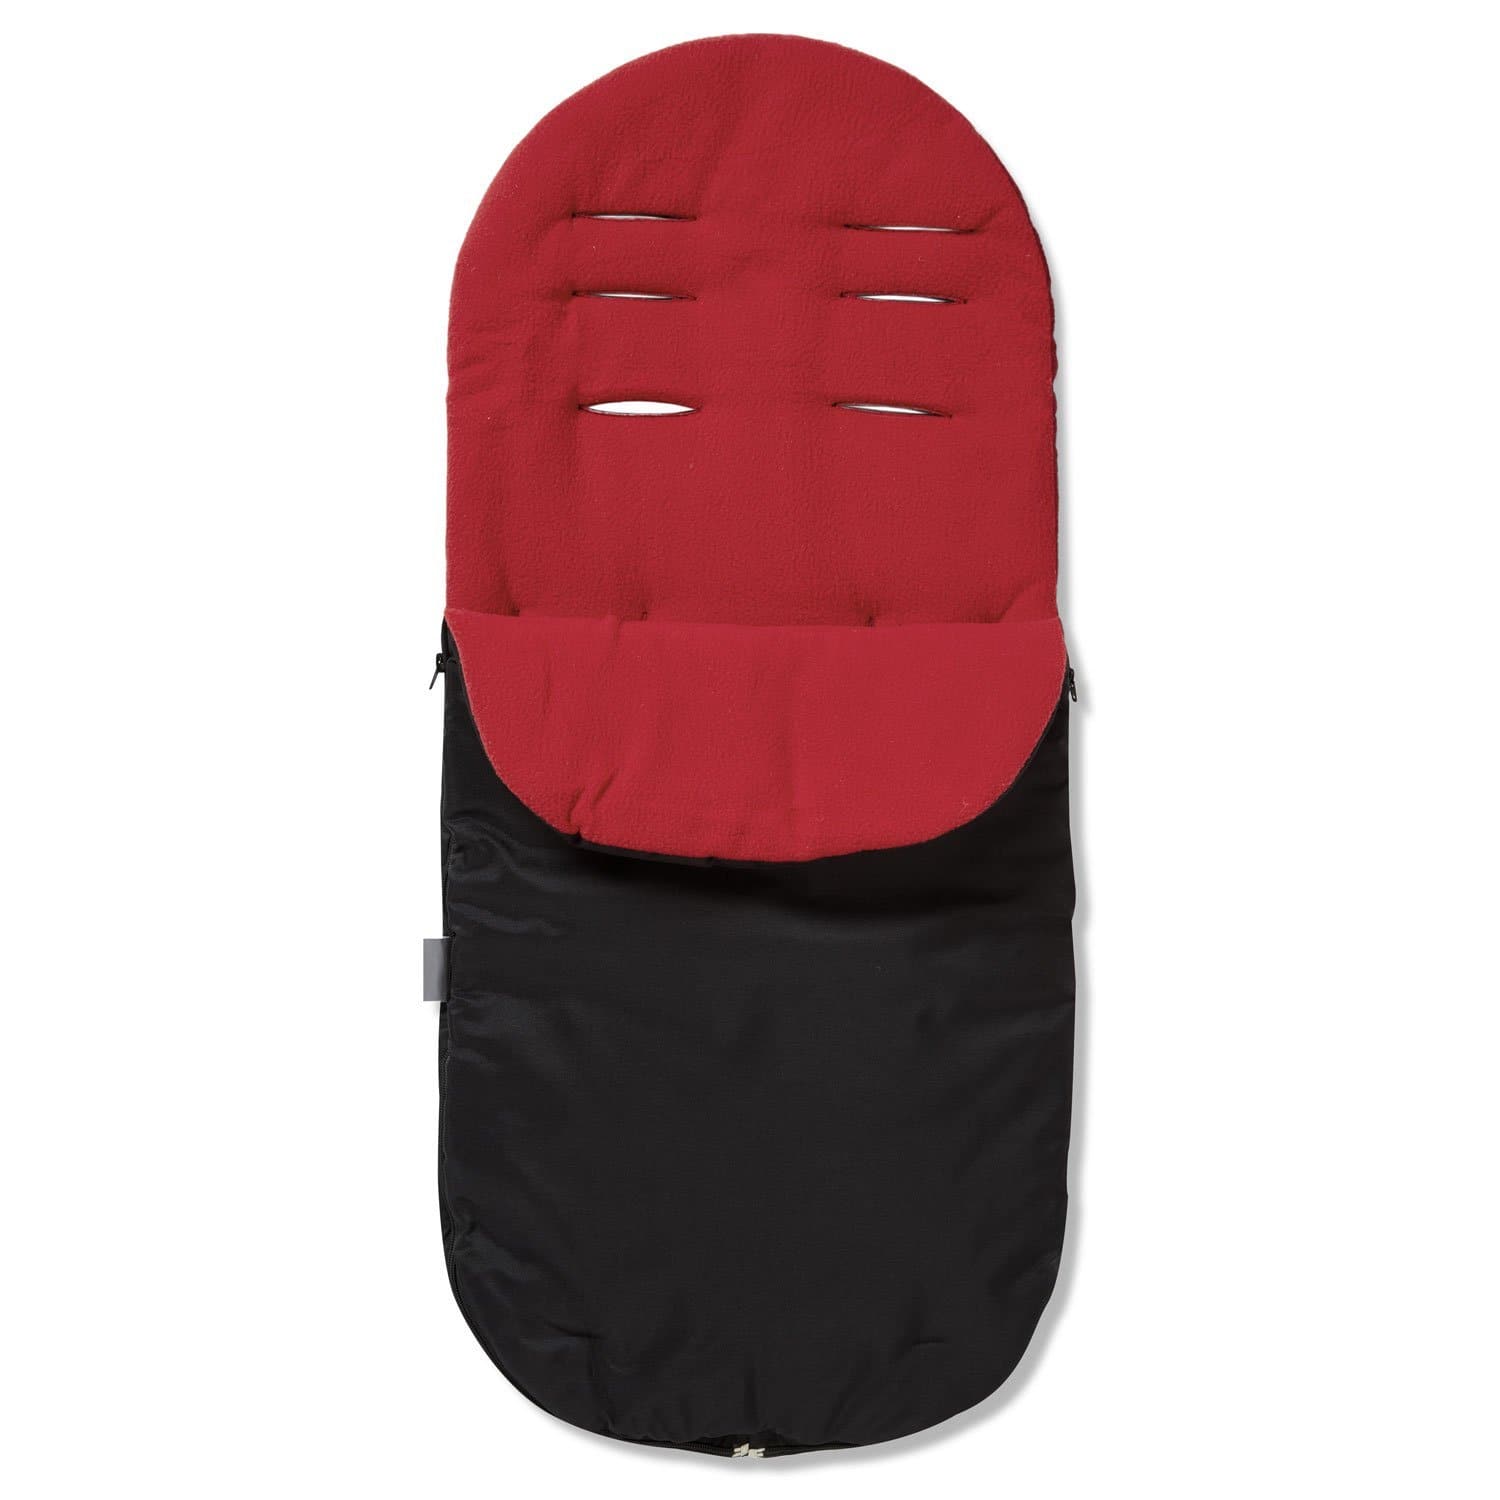 Footmuff / Cosy Toes Compatible with Inglesina - Red / Fits All Models | For Your Little One